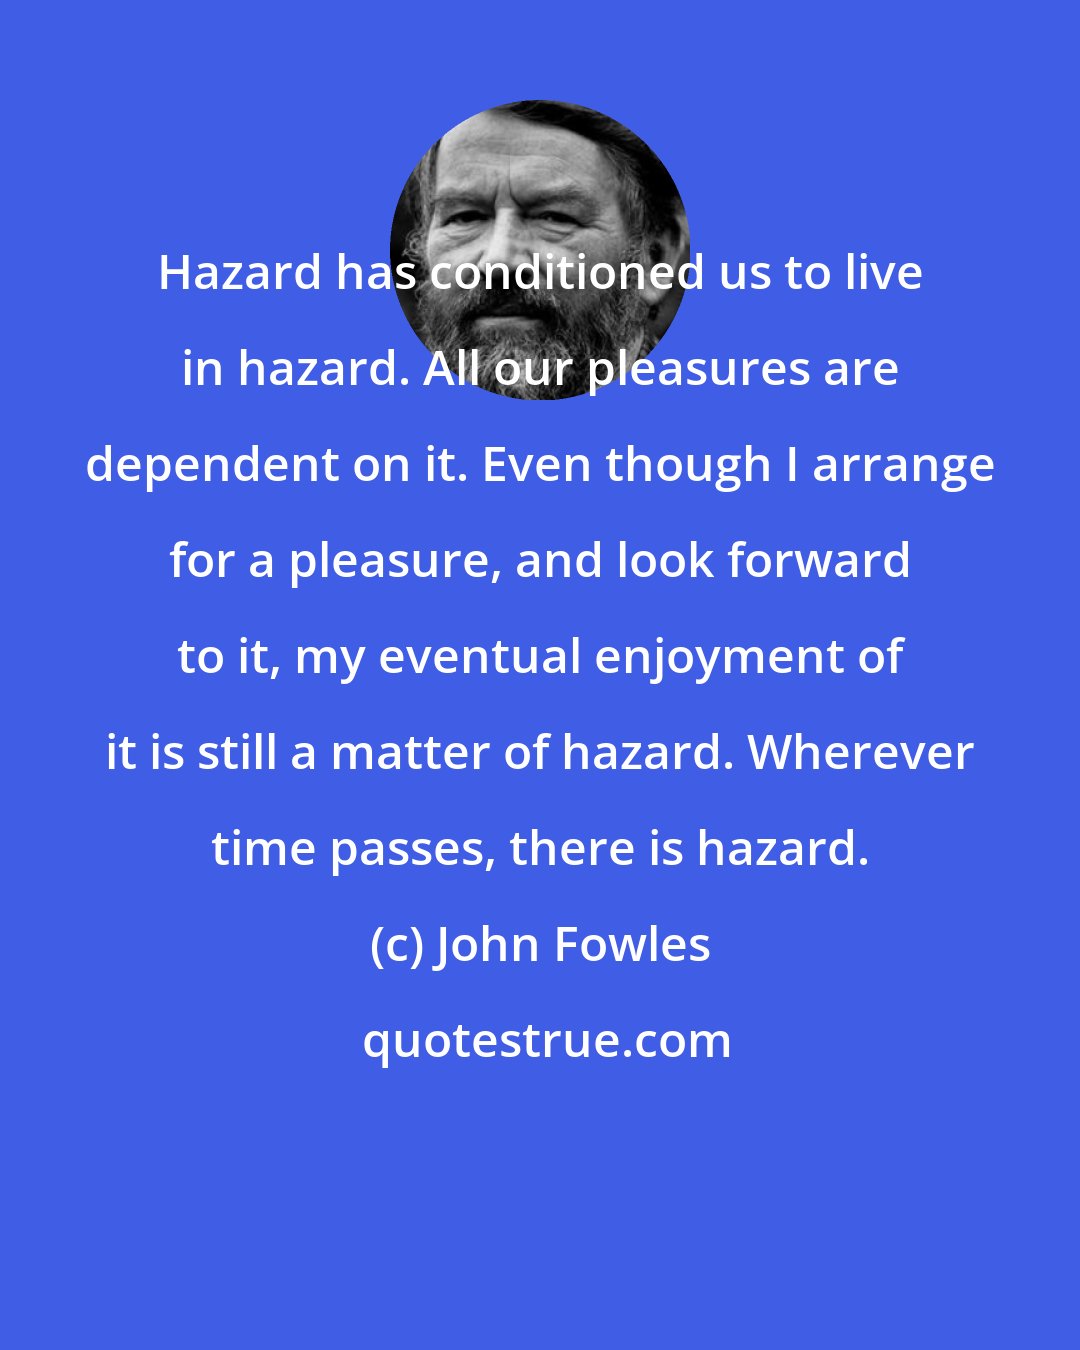 John Fowles: Hazard has conditioned us to live in hazard. All our pleasures are dependent on it. Even though I arrange for a pleasure, and look forward to it, my eventual enjoyment of it is still a matter of hazard. Wherever time passes, there is hazard.